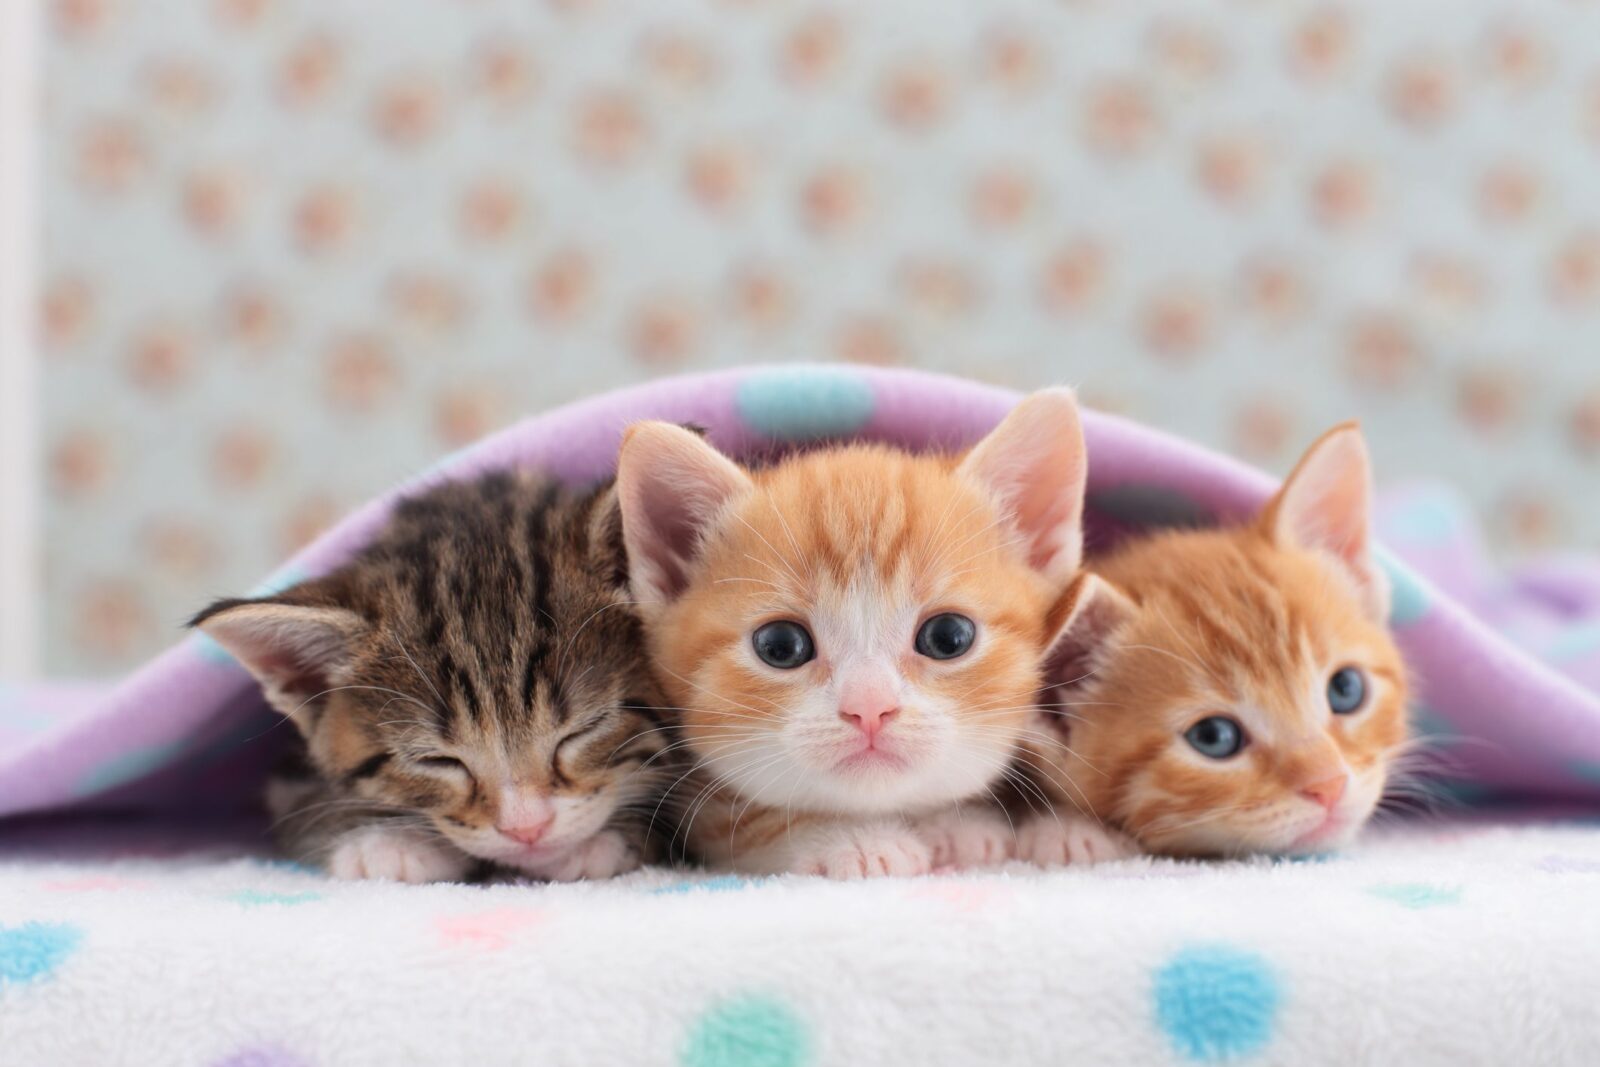 Can You Pass This General Knowledge Quiz While Being Distracted by Adorable Kittens? Cute cat kitten 14